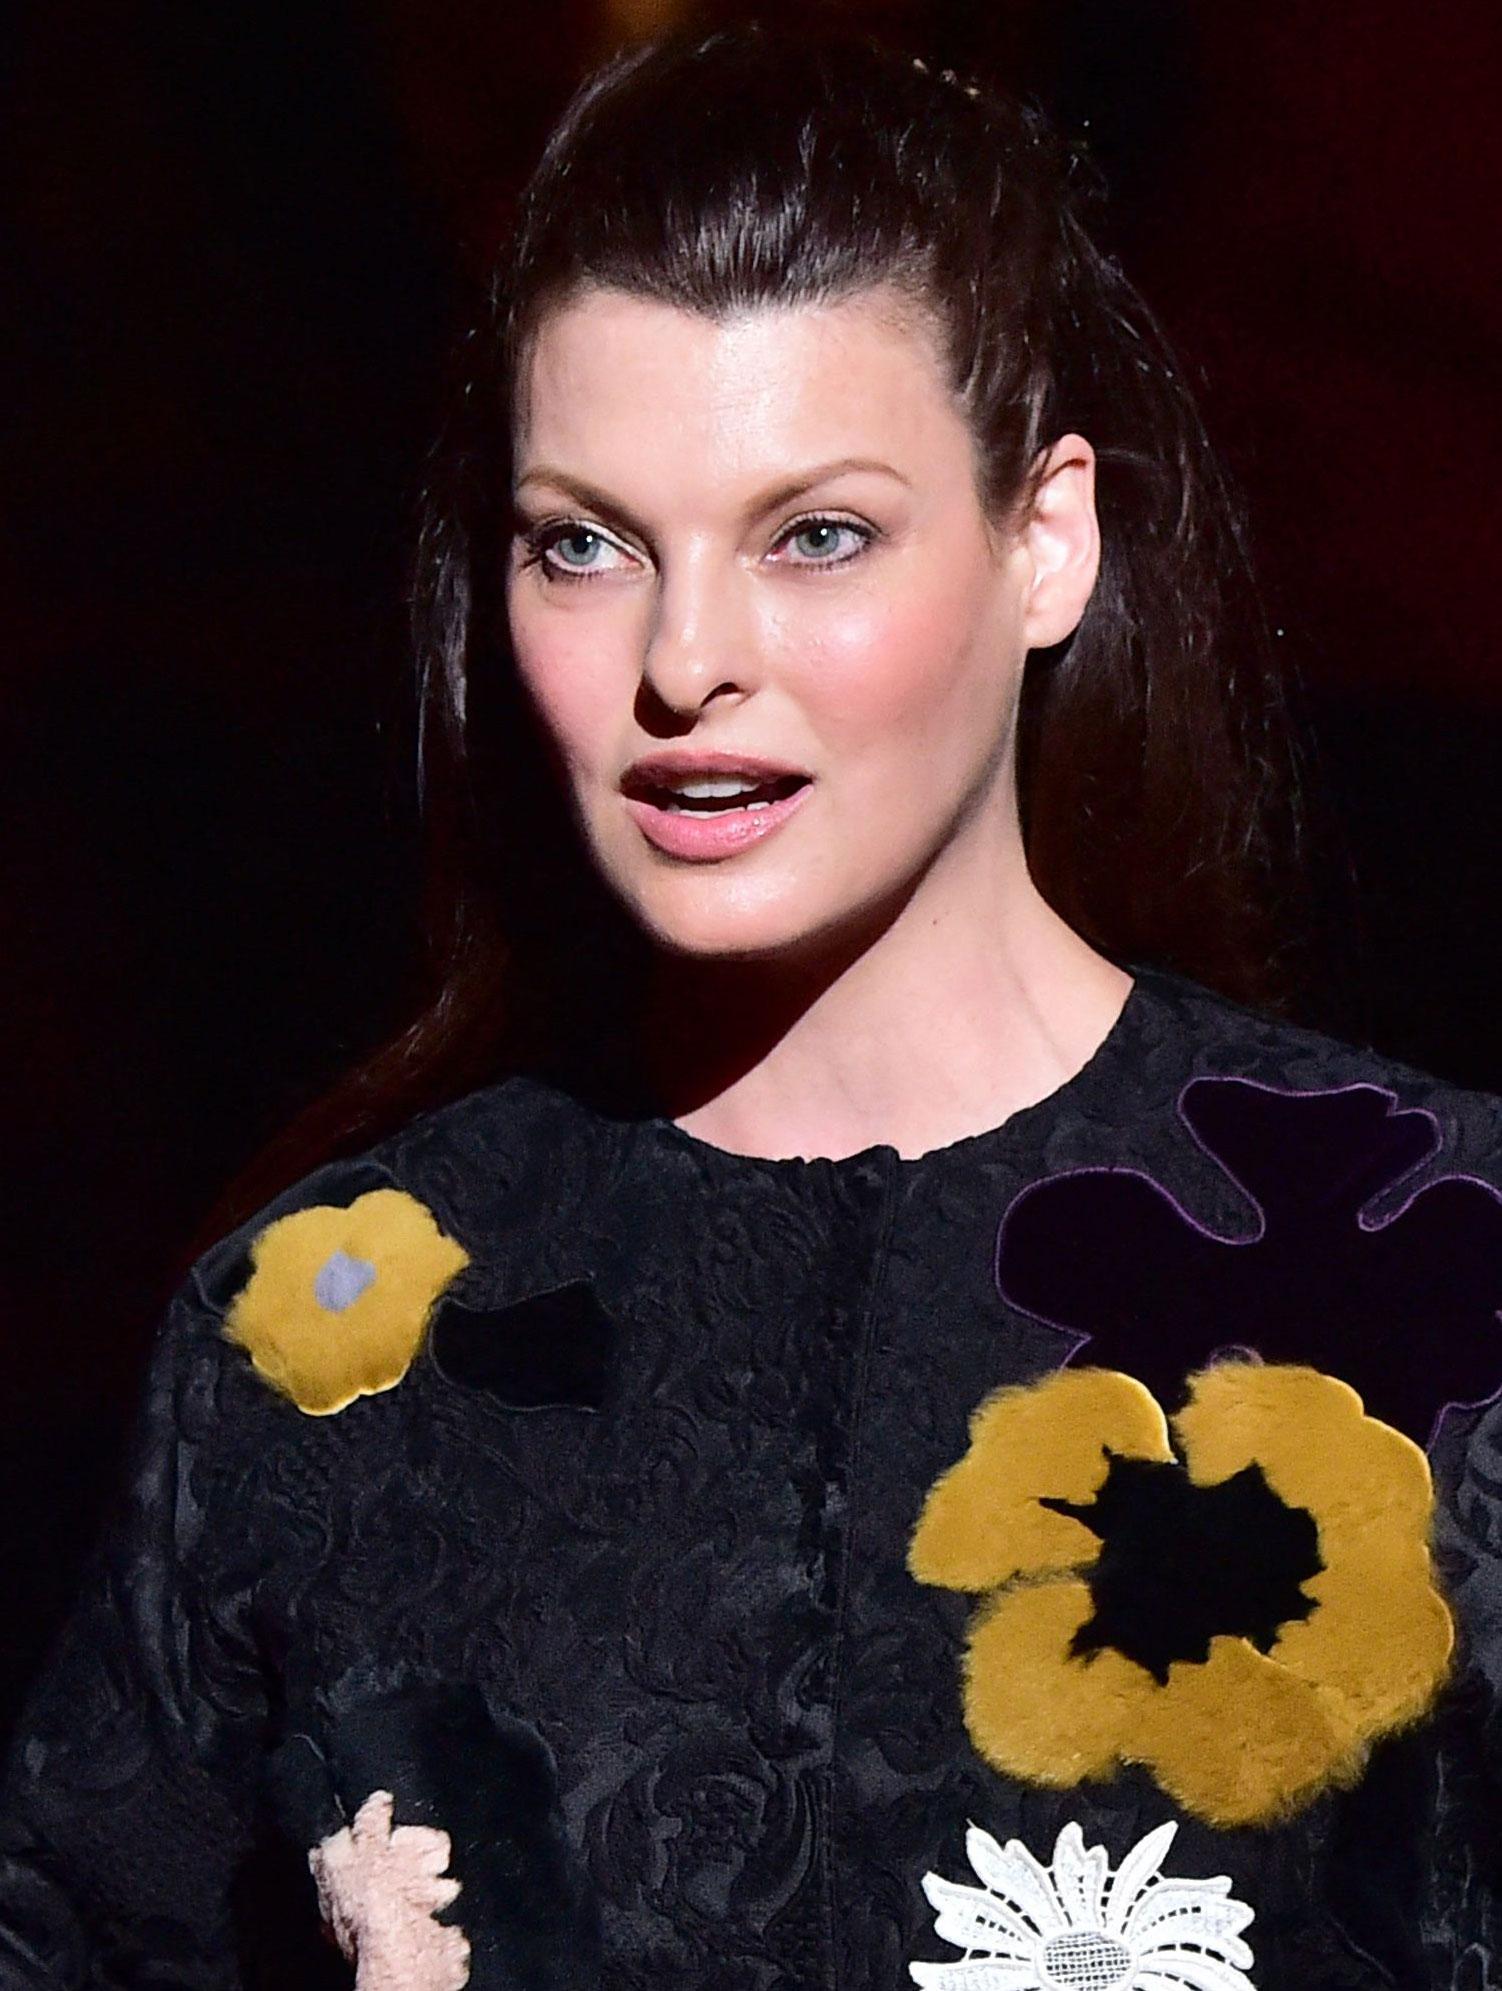 Supermodel Linda Evangelista was diagnosed with cancer, so she had both breasts removed